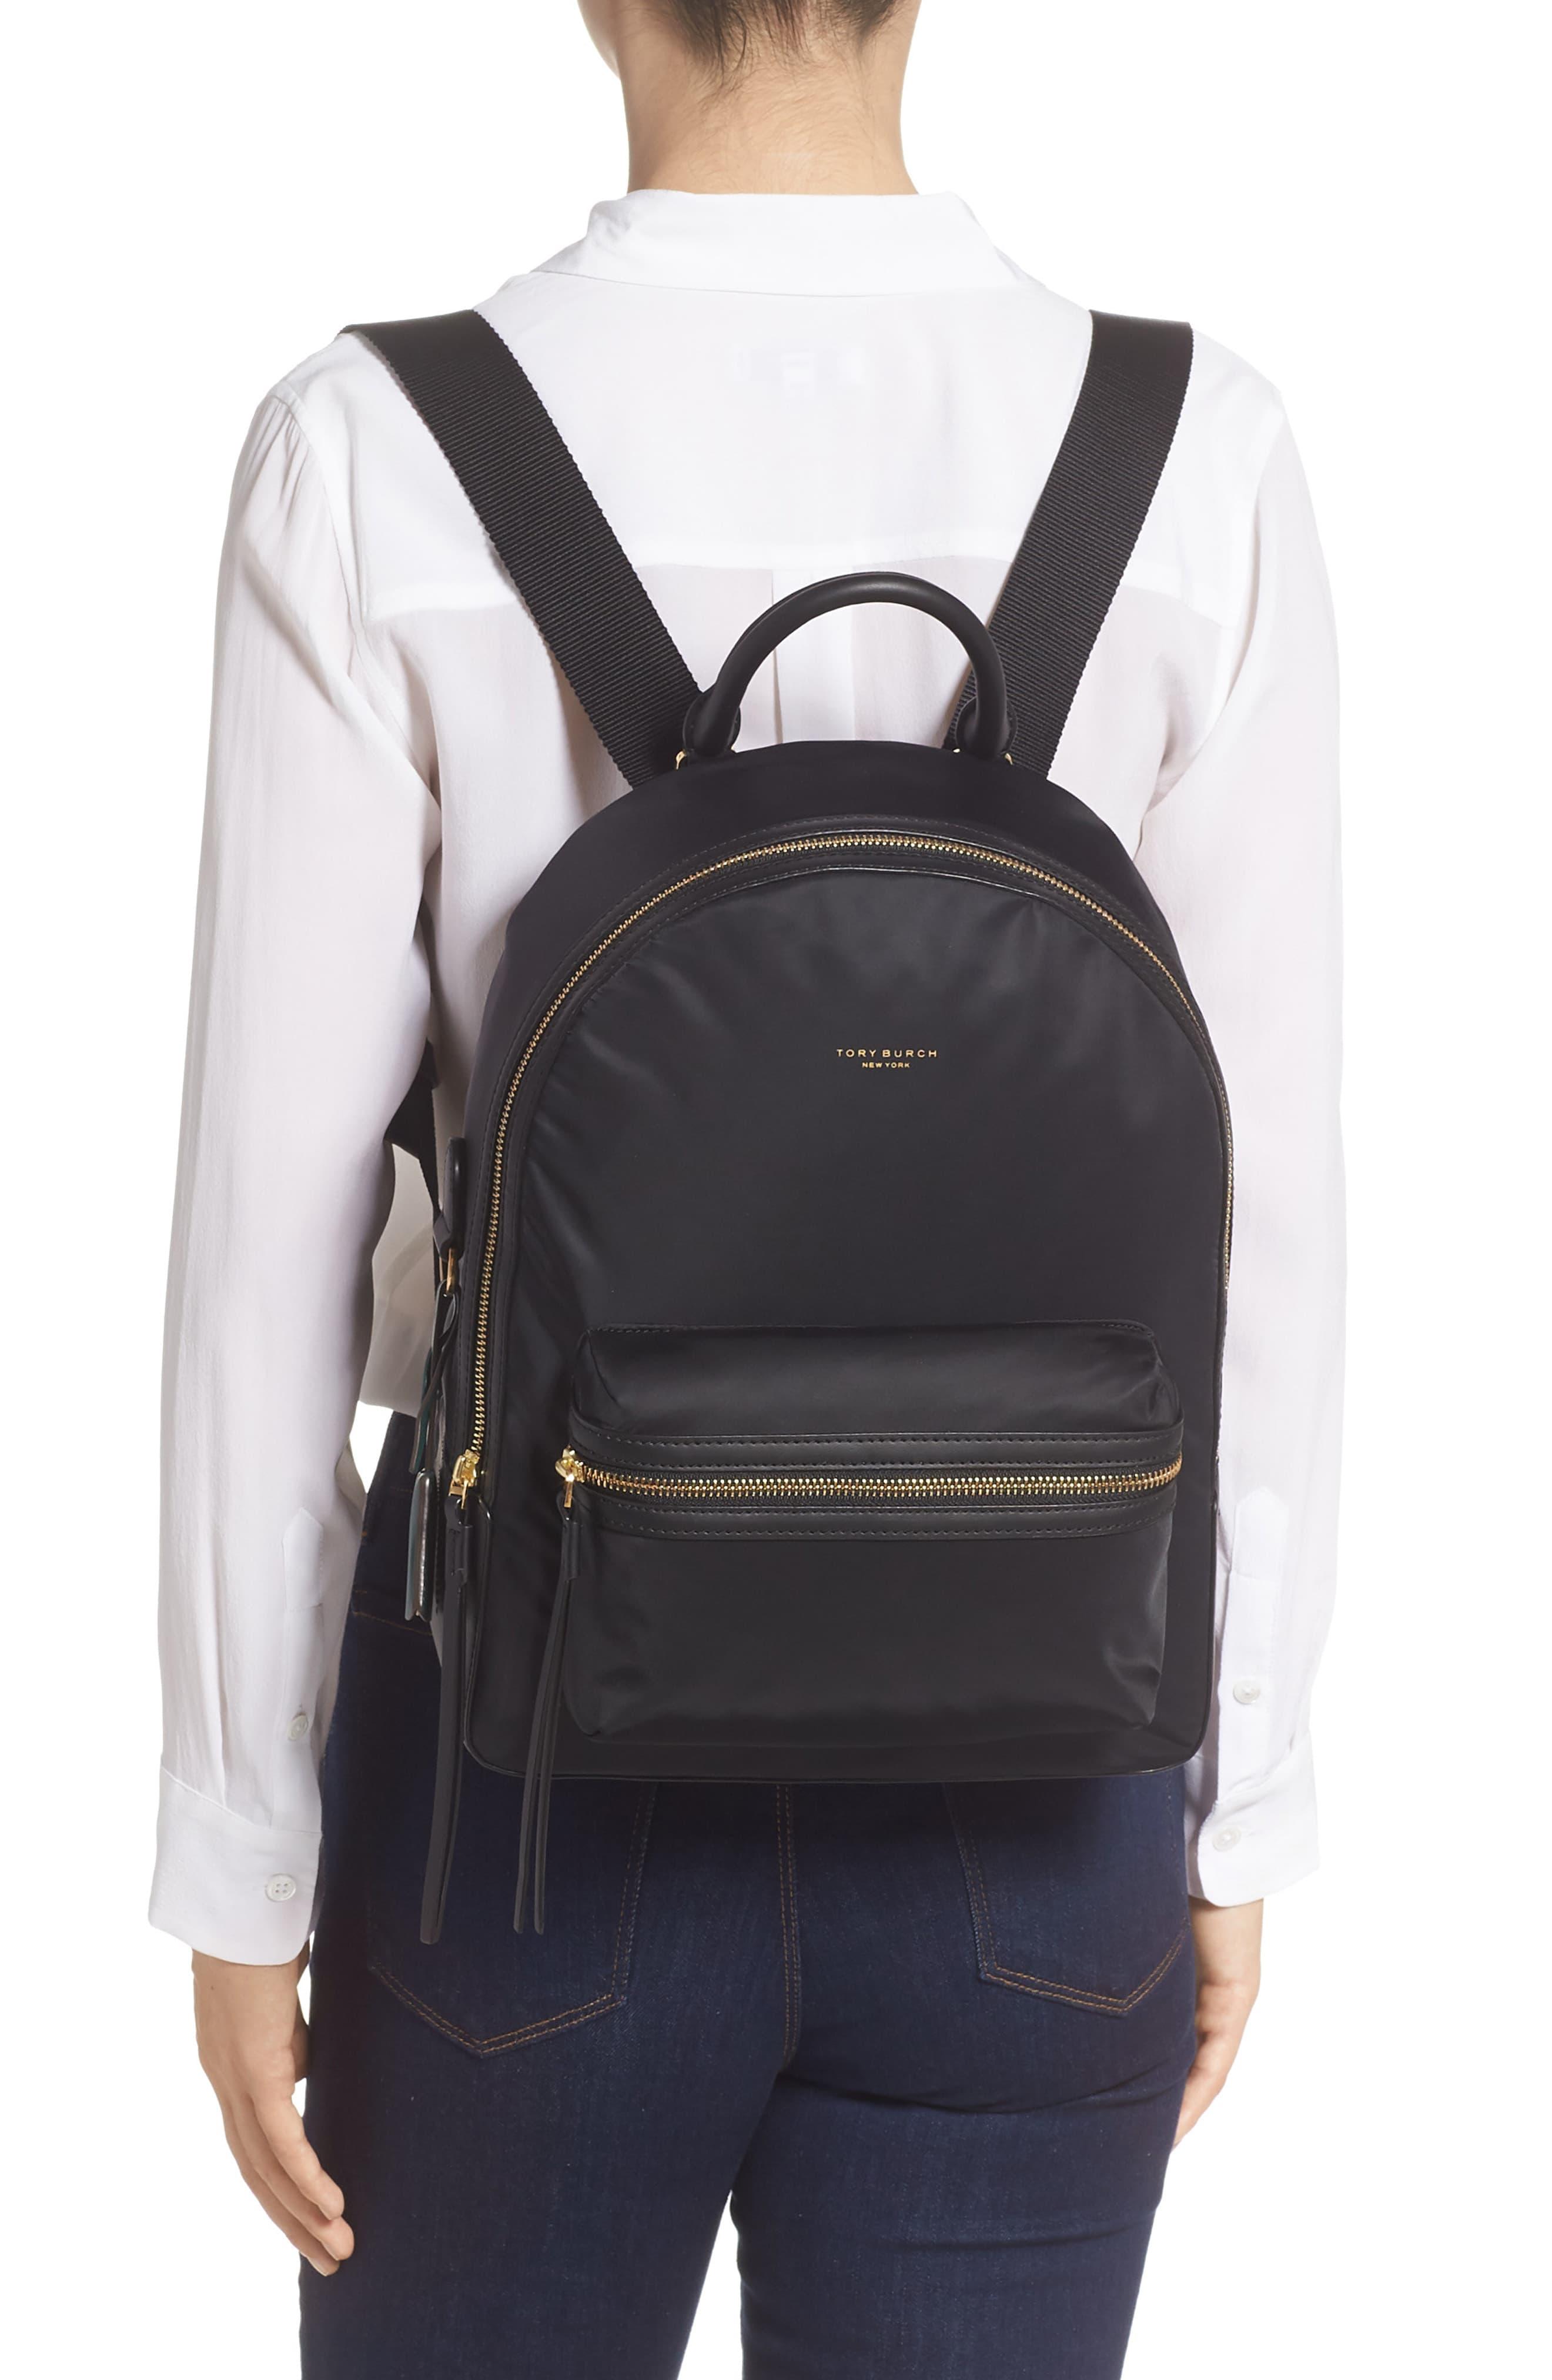 Tory Burch Backpack Nordstrom Rack Discount, SAVE 50% 